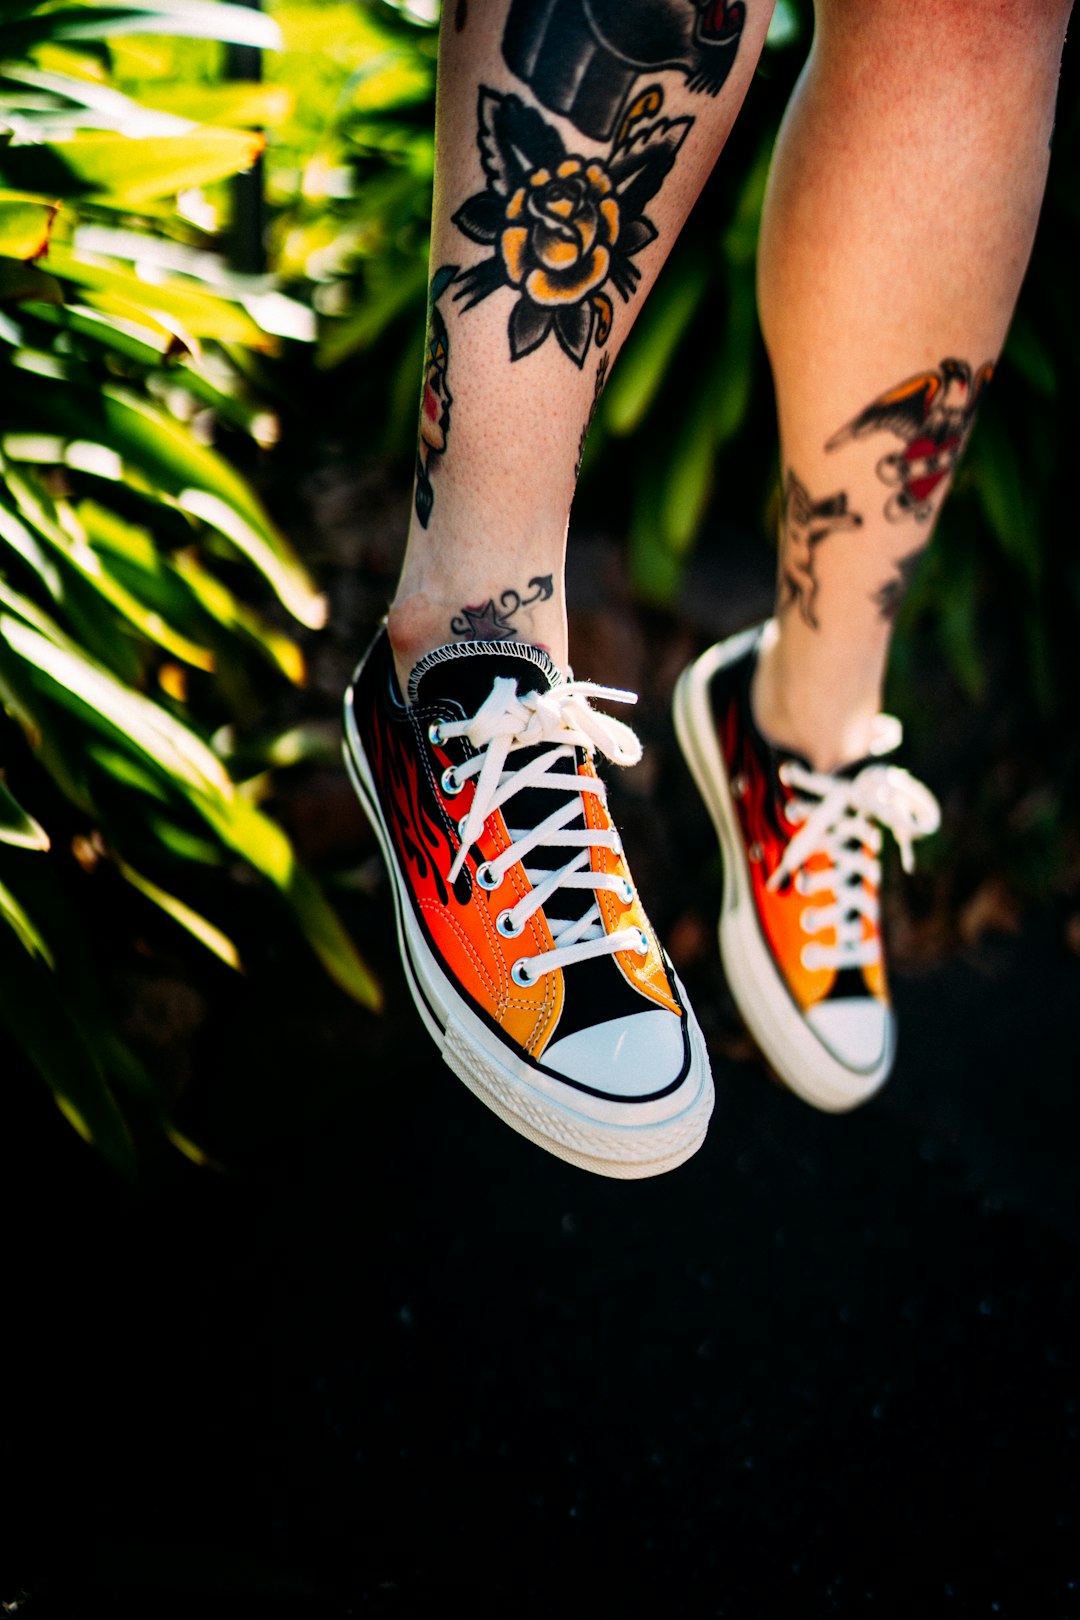 person wearing orange and white converse all star high top sneakers